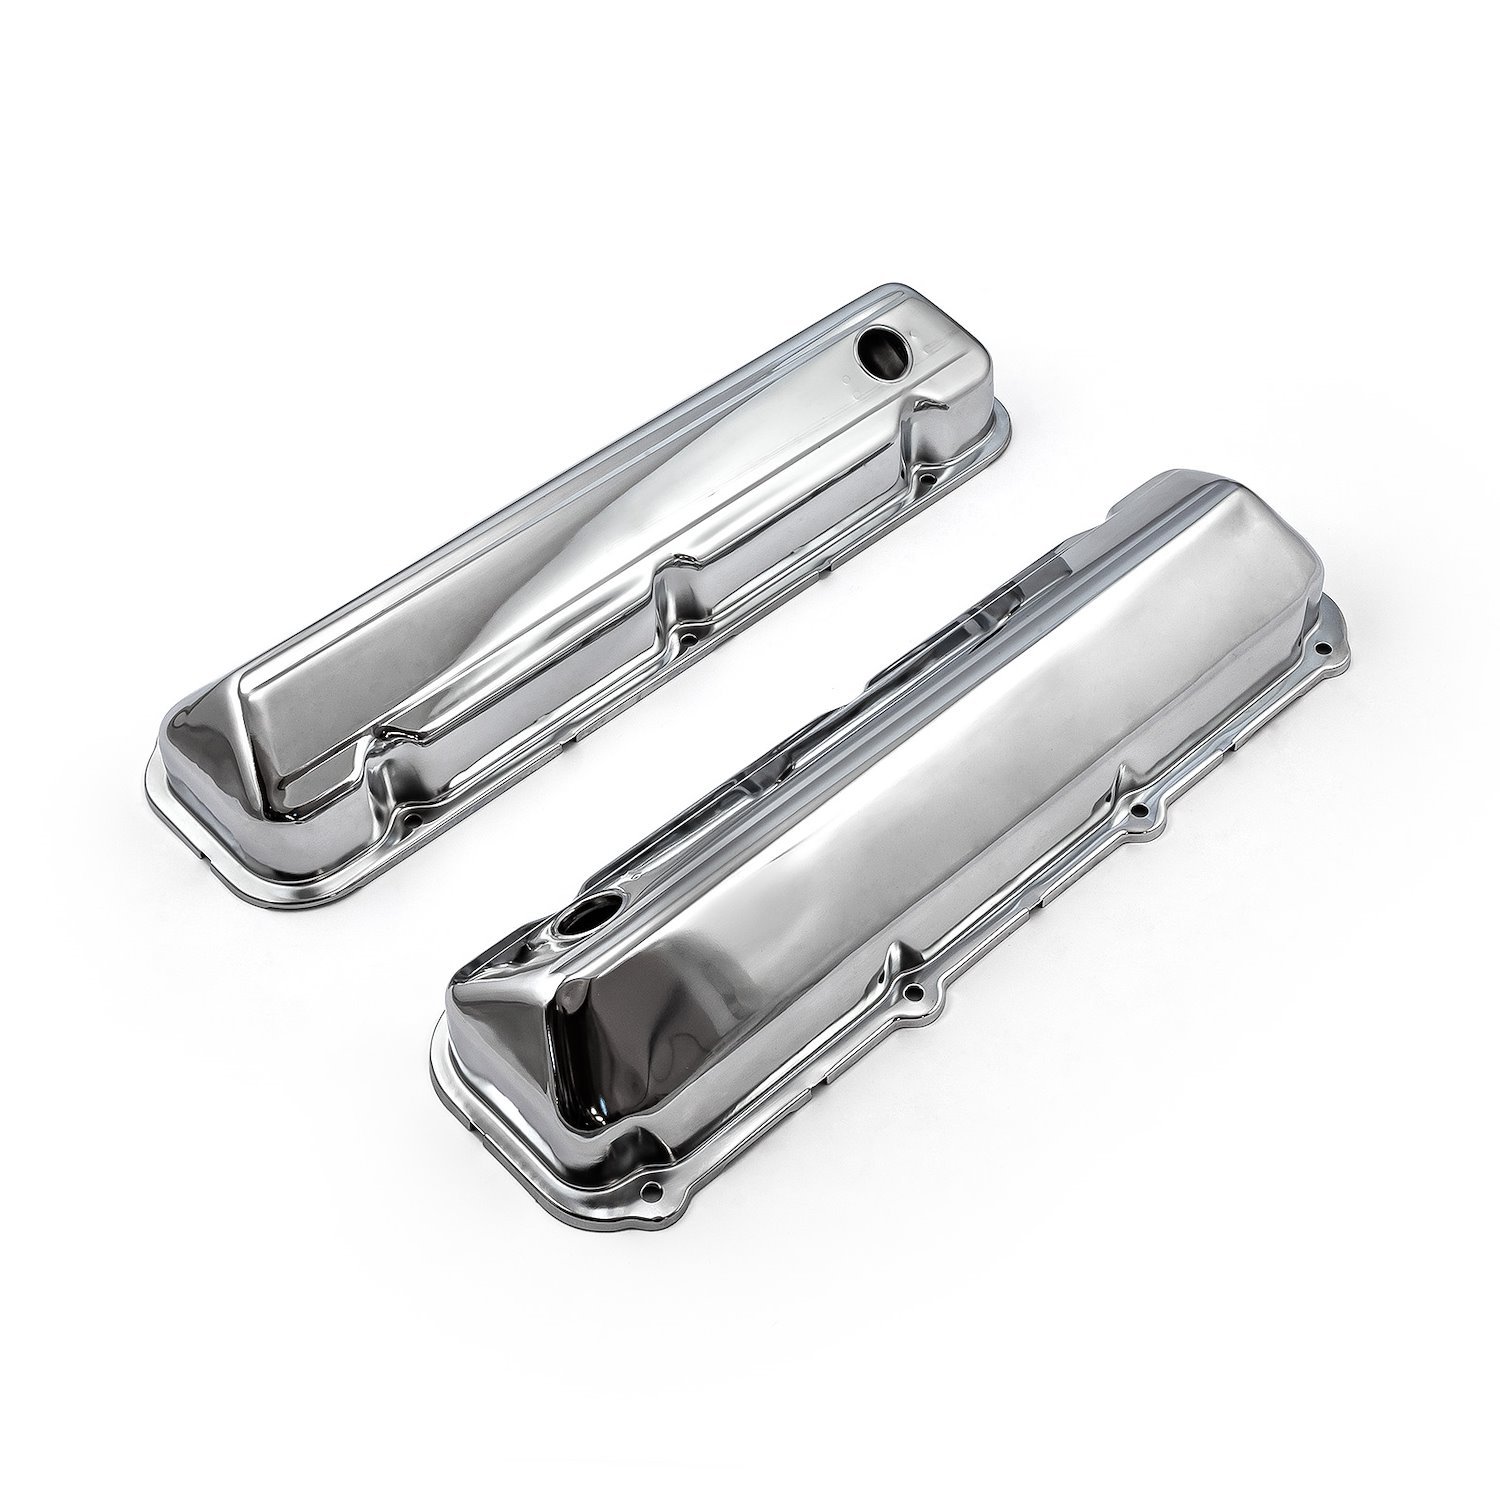 Ford 429 460 Chrome Steel Valve Covers - 3 1/2 Tall w/ Baffled Hole